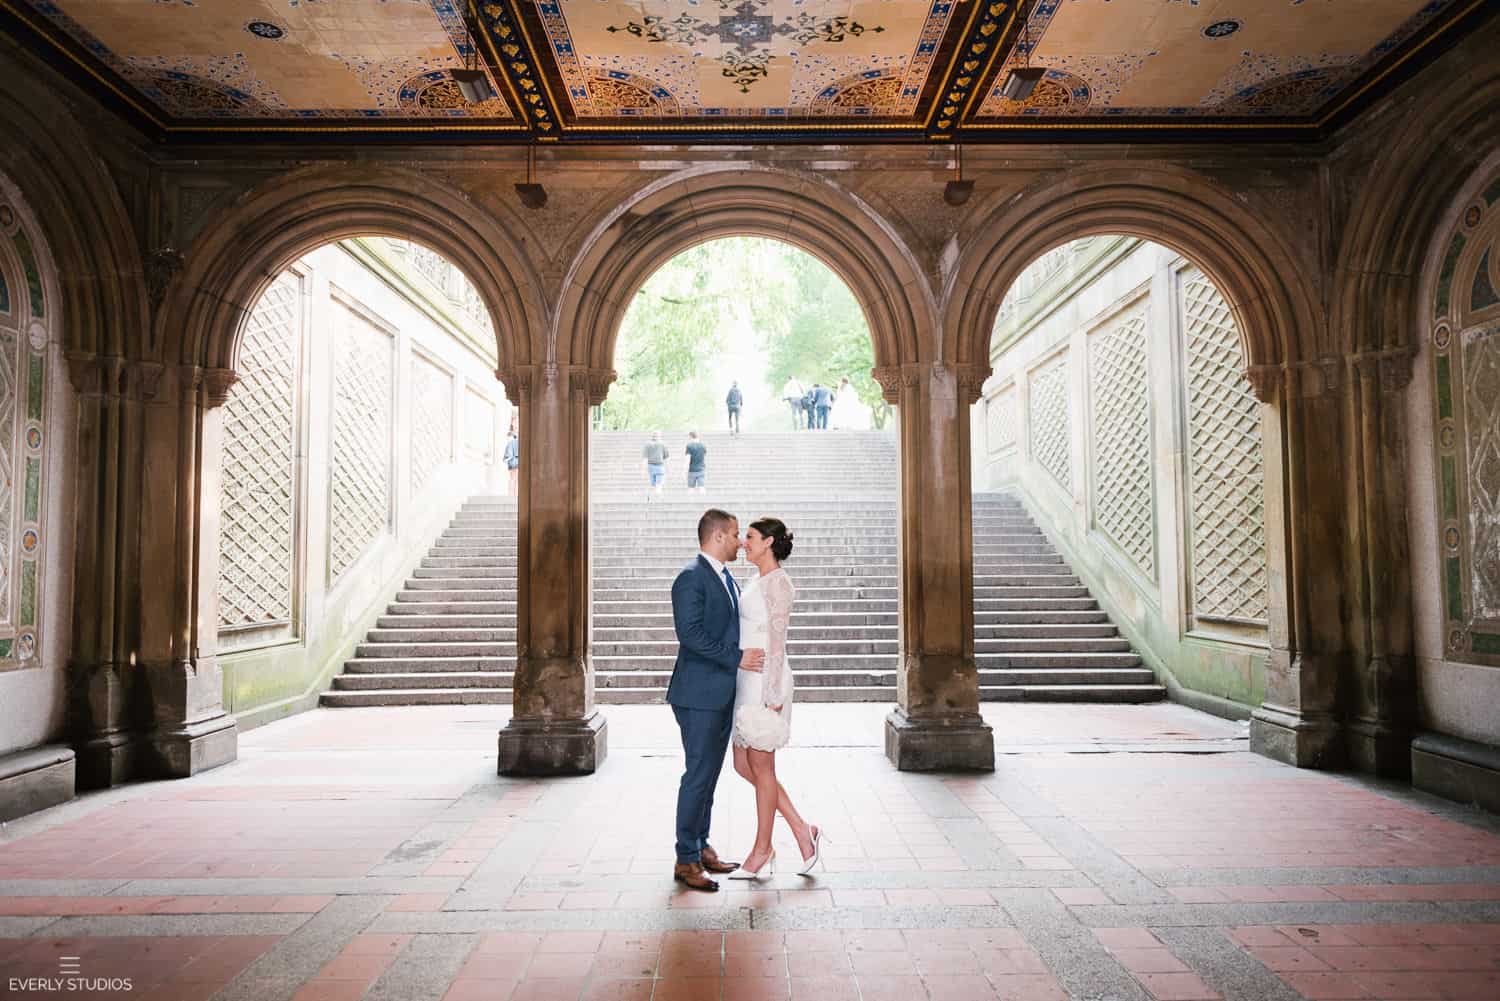 Central Park wedding in NYC